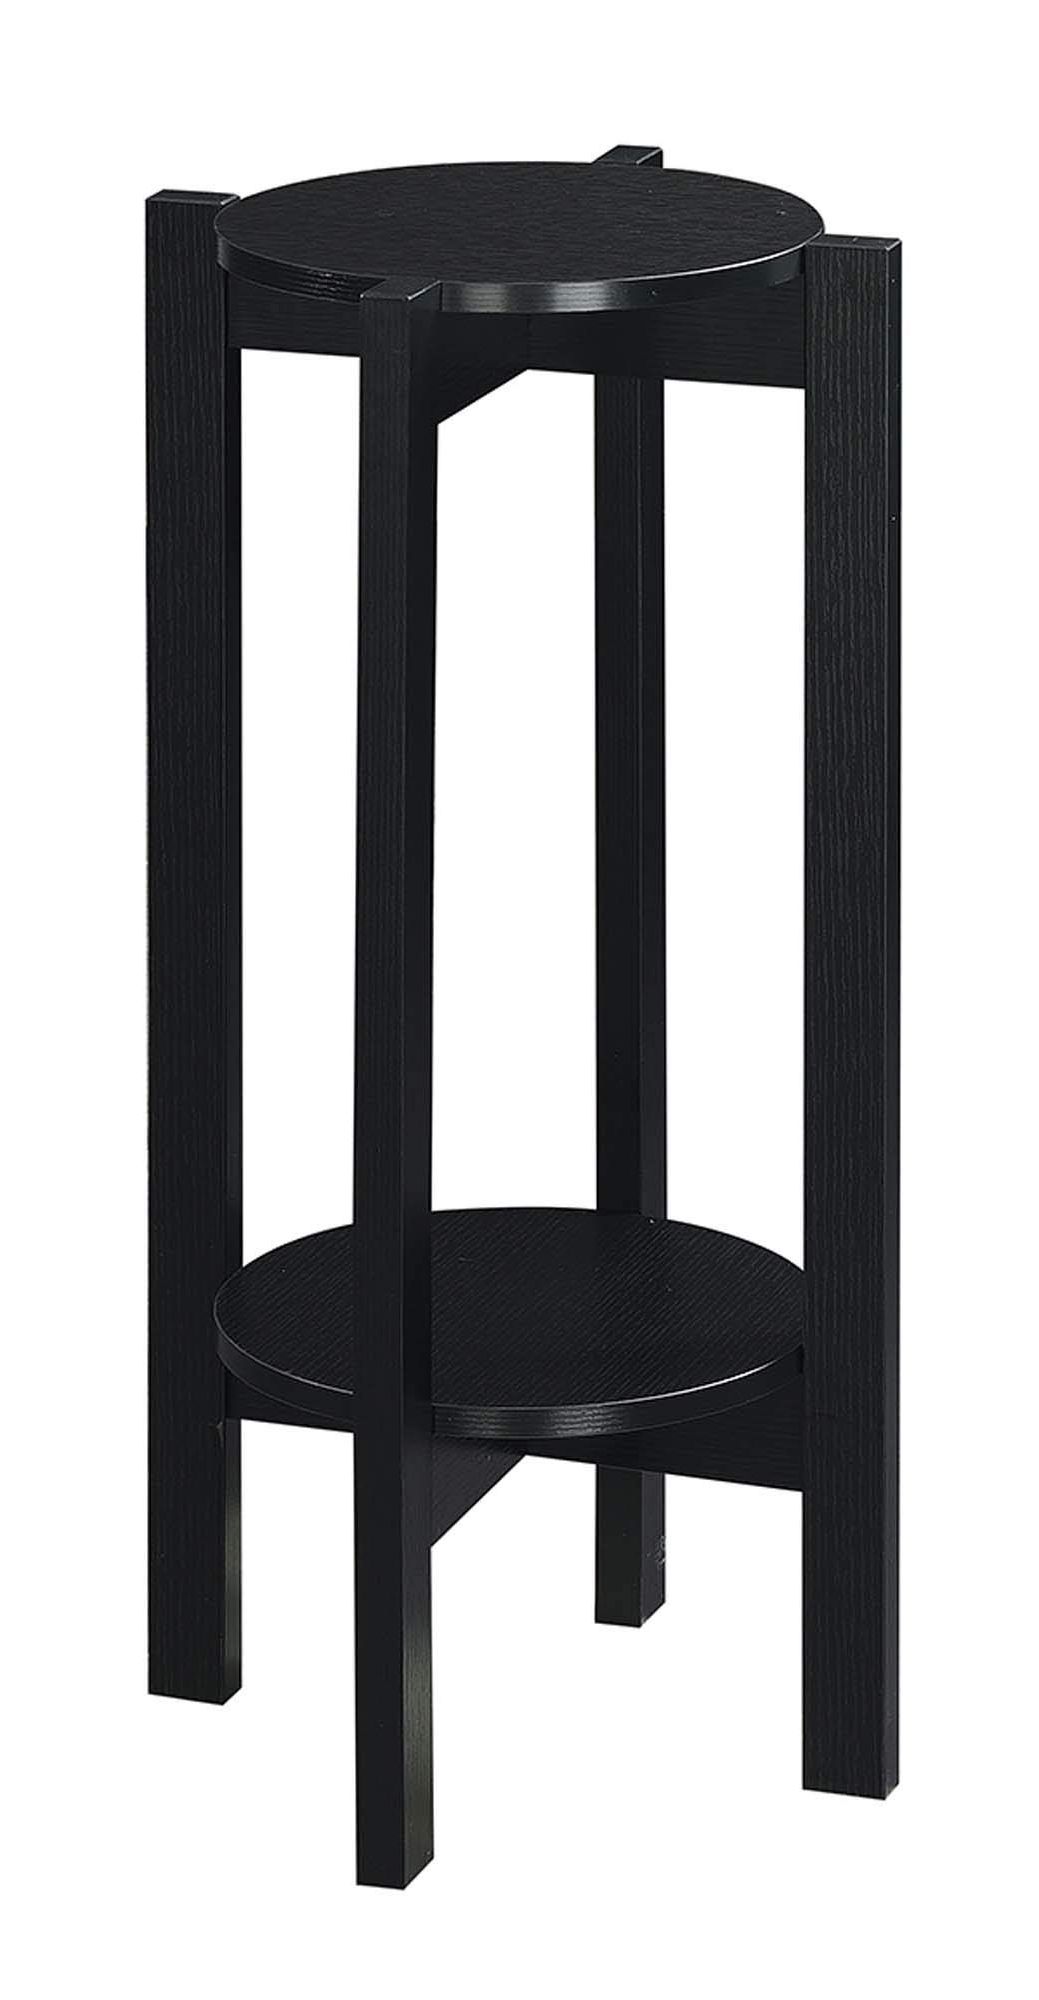 Deluxe Plant Stands Throughout Popular Amazon: Convenience Concepts Newport Deluxe Plant Stand, Black : Patio,  Lawn & Garden (View 6 of 10)